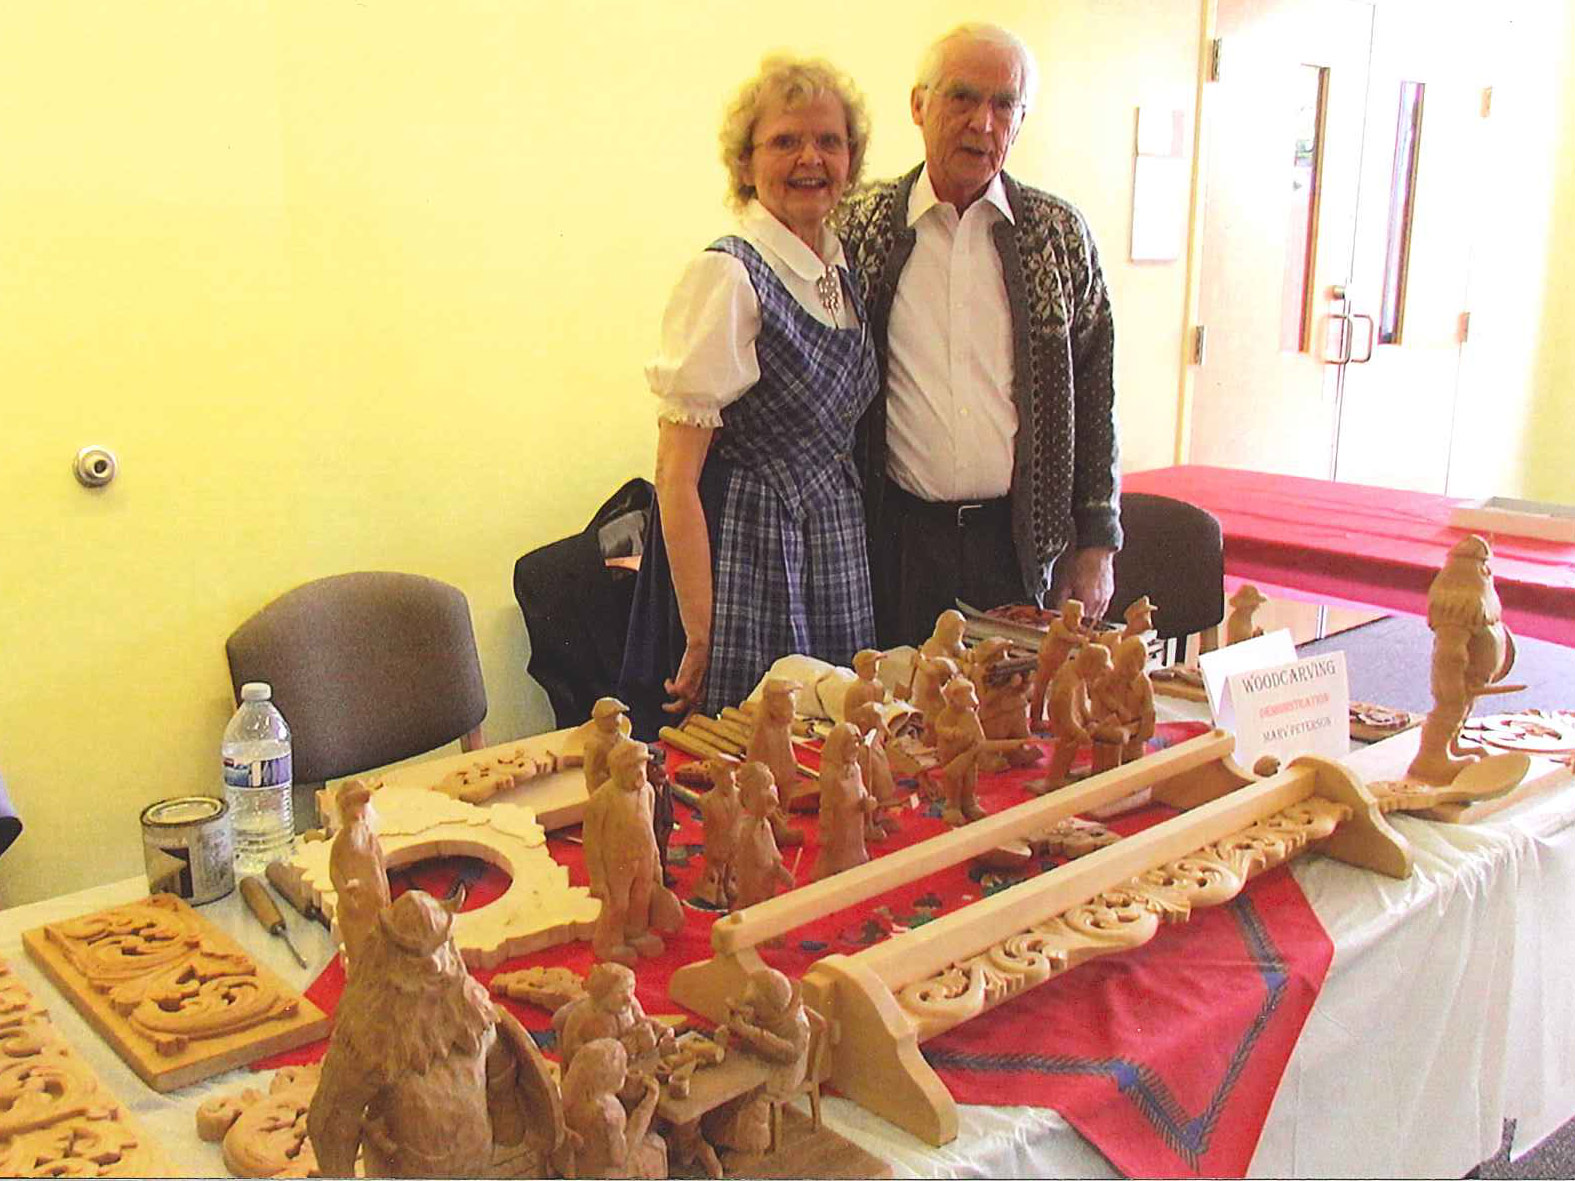 Norwegian Heritage Festival - a couple with their wooden carvings